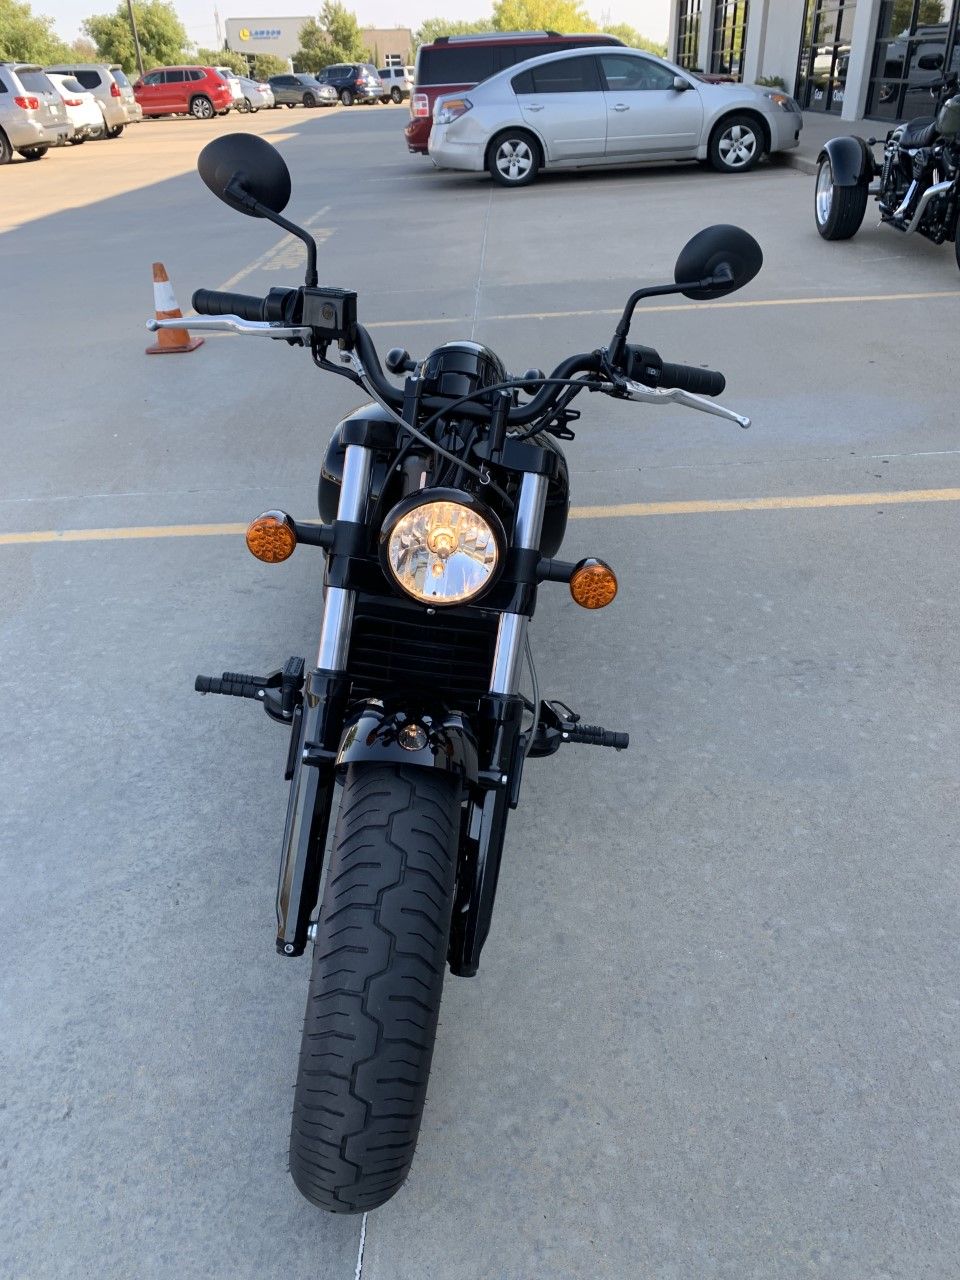 2021 Indian SCOUT BOBBER SIXTY in Norman, Oklahoma - Photo 3